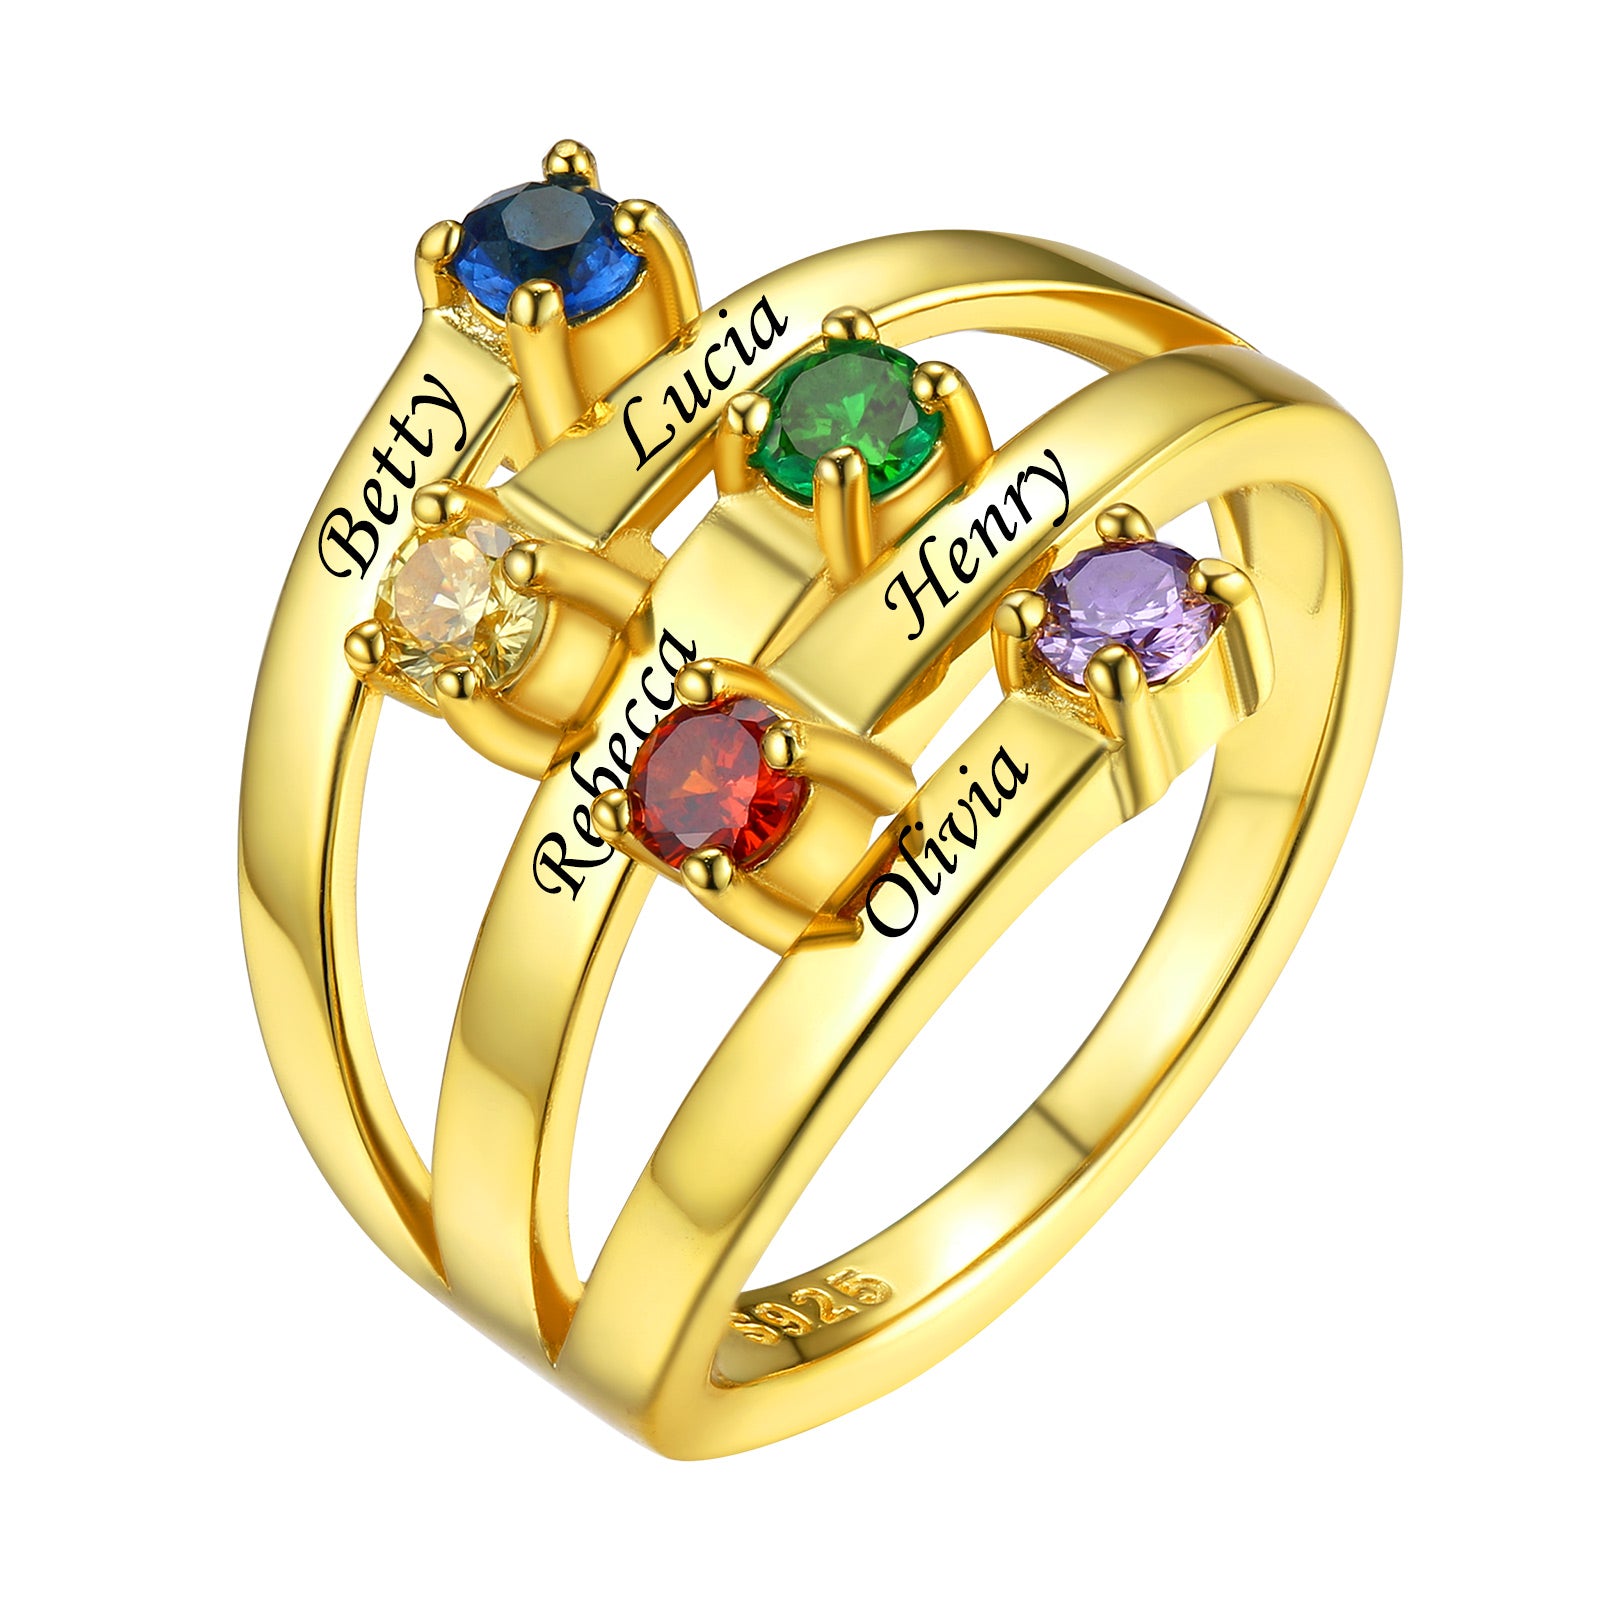 Adjustable Sterling Silver Personalized Birthstone Ring Gold 5 Stone